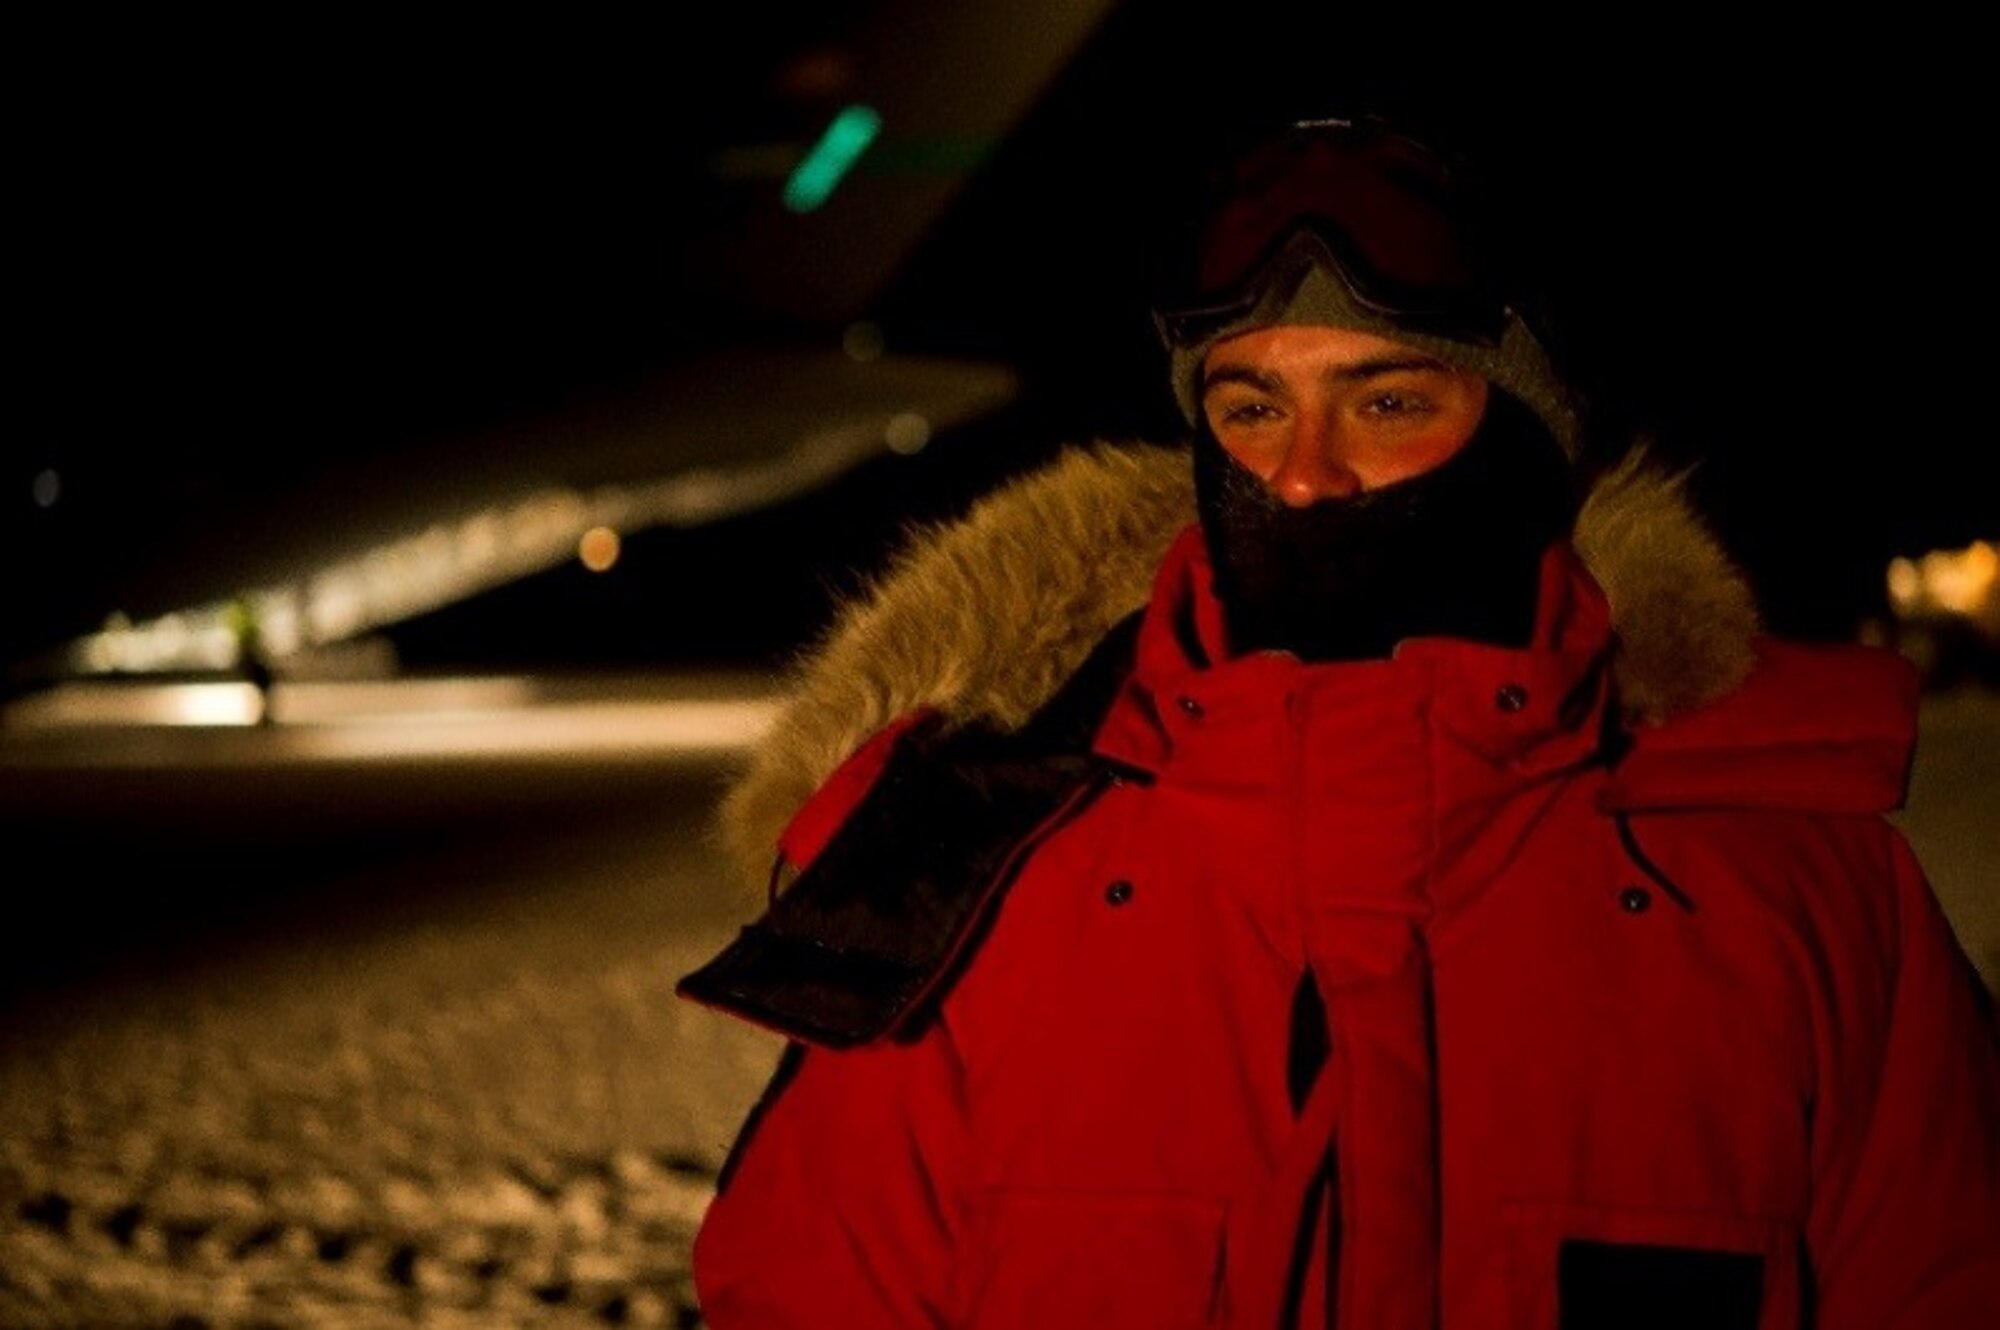 160715-F-GD533-014 – U.S. Air Force Staff Sgt. Kirk Halsey, 304th Expeditionary Airlift Squadron crew chief, dawns extreme cold weather gear as he stands in front of a C-17 Globemaster III during Operation Deep Freeze (ODF), July 15, 2016, at Pegasus Ice Runway, Antarctica. ODF is one of the most difficult U.S. military peacetime missions due to the austere environment in which it is conducted. Therefore, extreme cold weather gear, including polar fleeces, balaclavas (ski masks), mukluks (soft boots designed for cold weather), cold weather gloves, ear bands, neck gaiters, hats, polar fleece pants, insulated cold weather bibs, extreme cold weather parkas, is issued to personnel in order for them to be prepared to support this vital mission. (U.S. Air Force Reserve photo by Staff Sgt. Madelyn McCullough